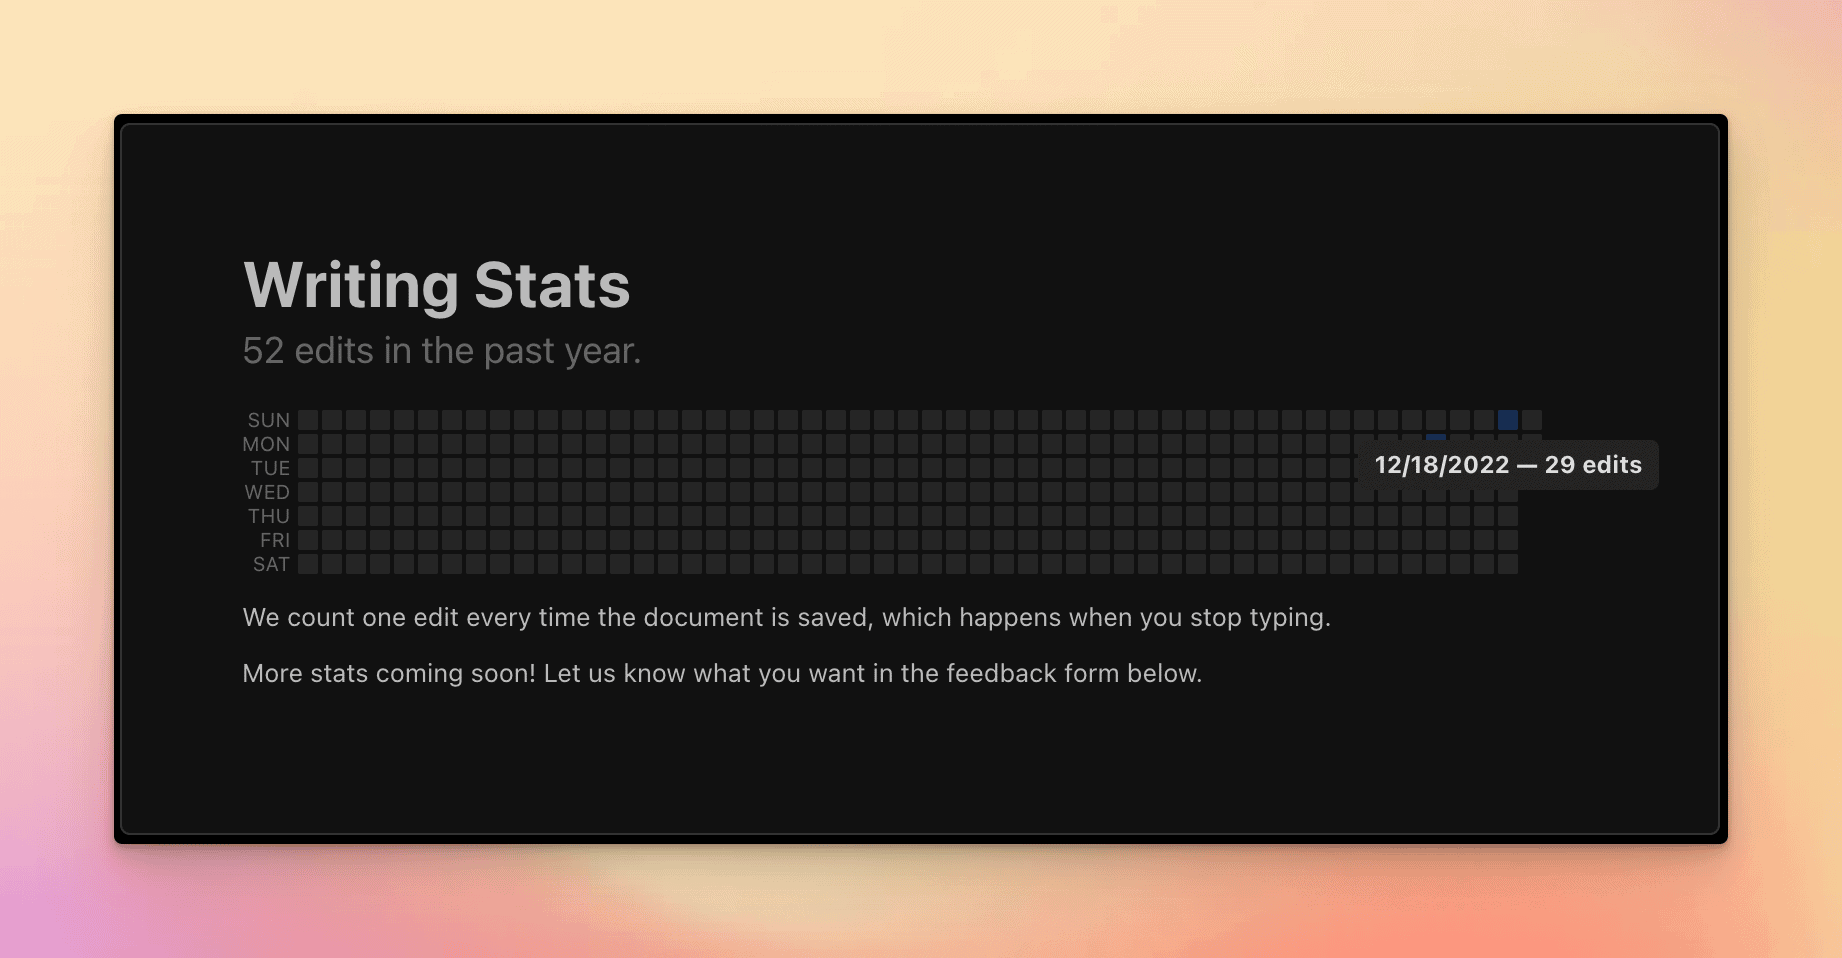 Lex.page writing stats, similar view to GitHub activity screen